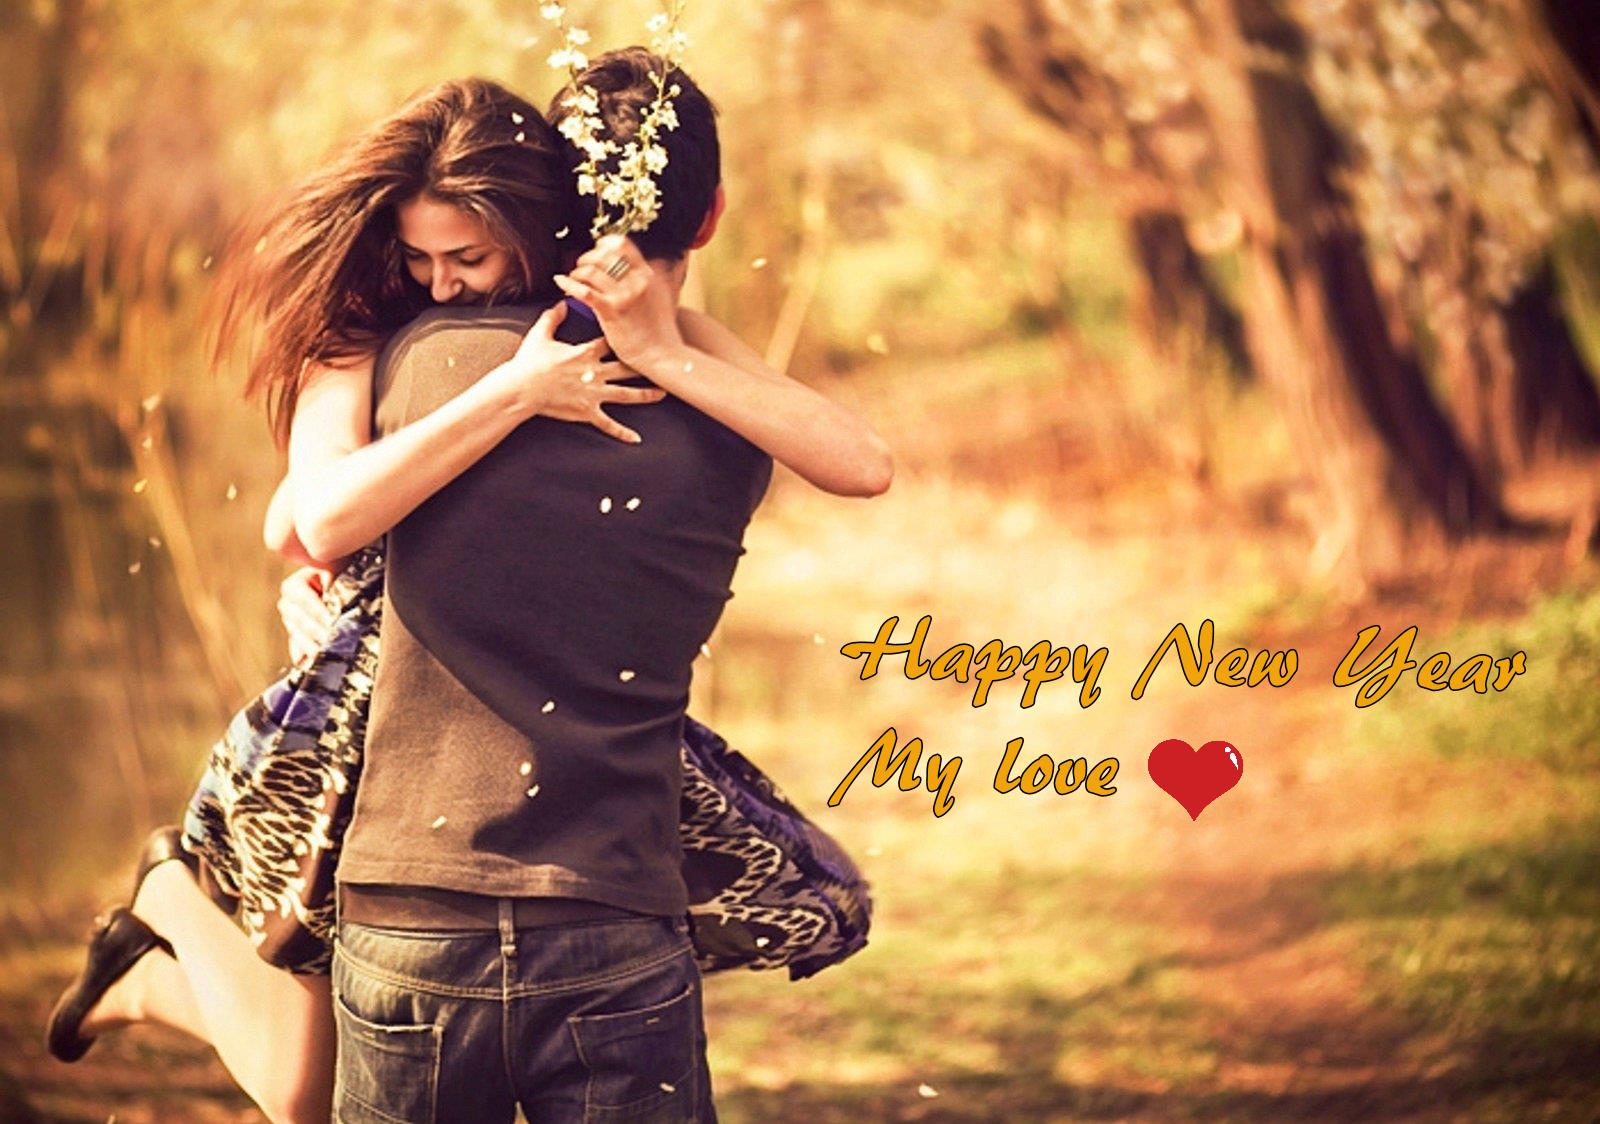 Free Download Happy New Year 2015 Couple Love Hd Wallpaper Stylish Hd Wallpapers 1600x1124 For